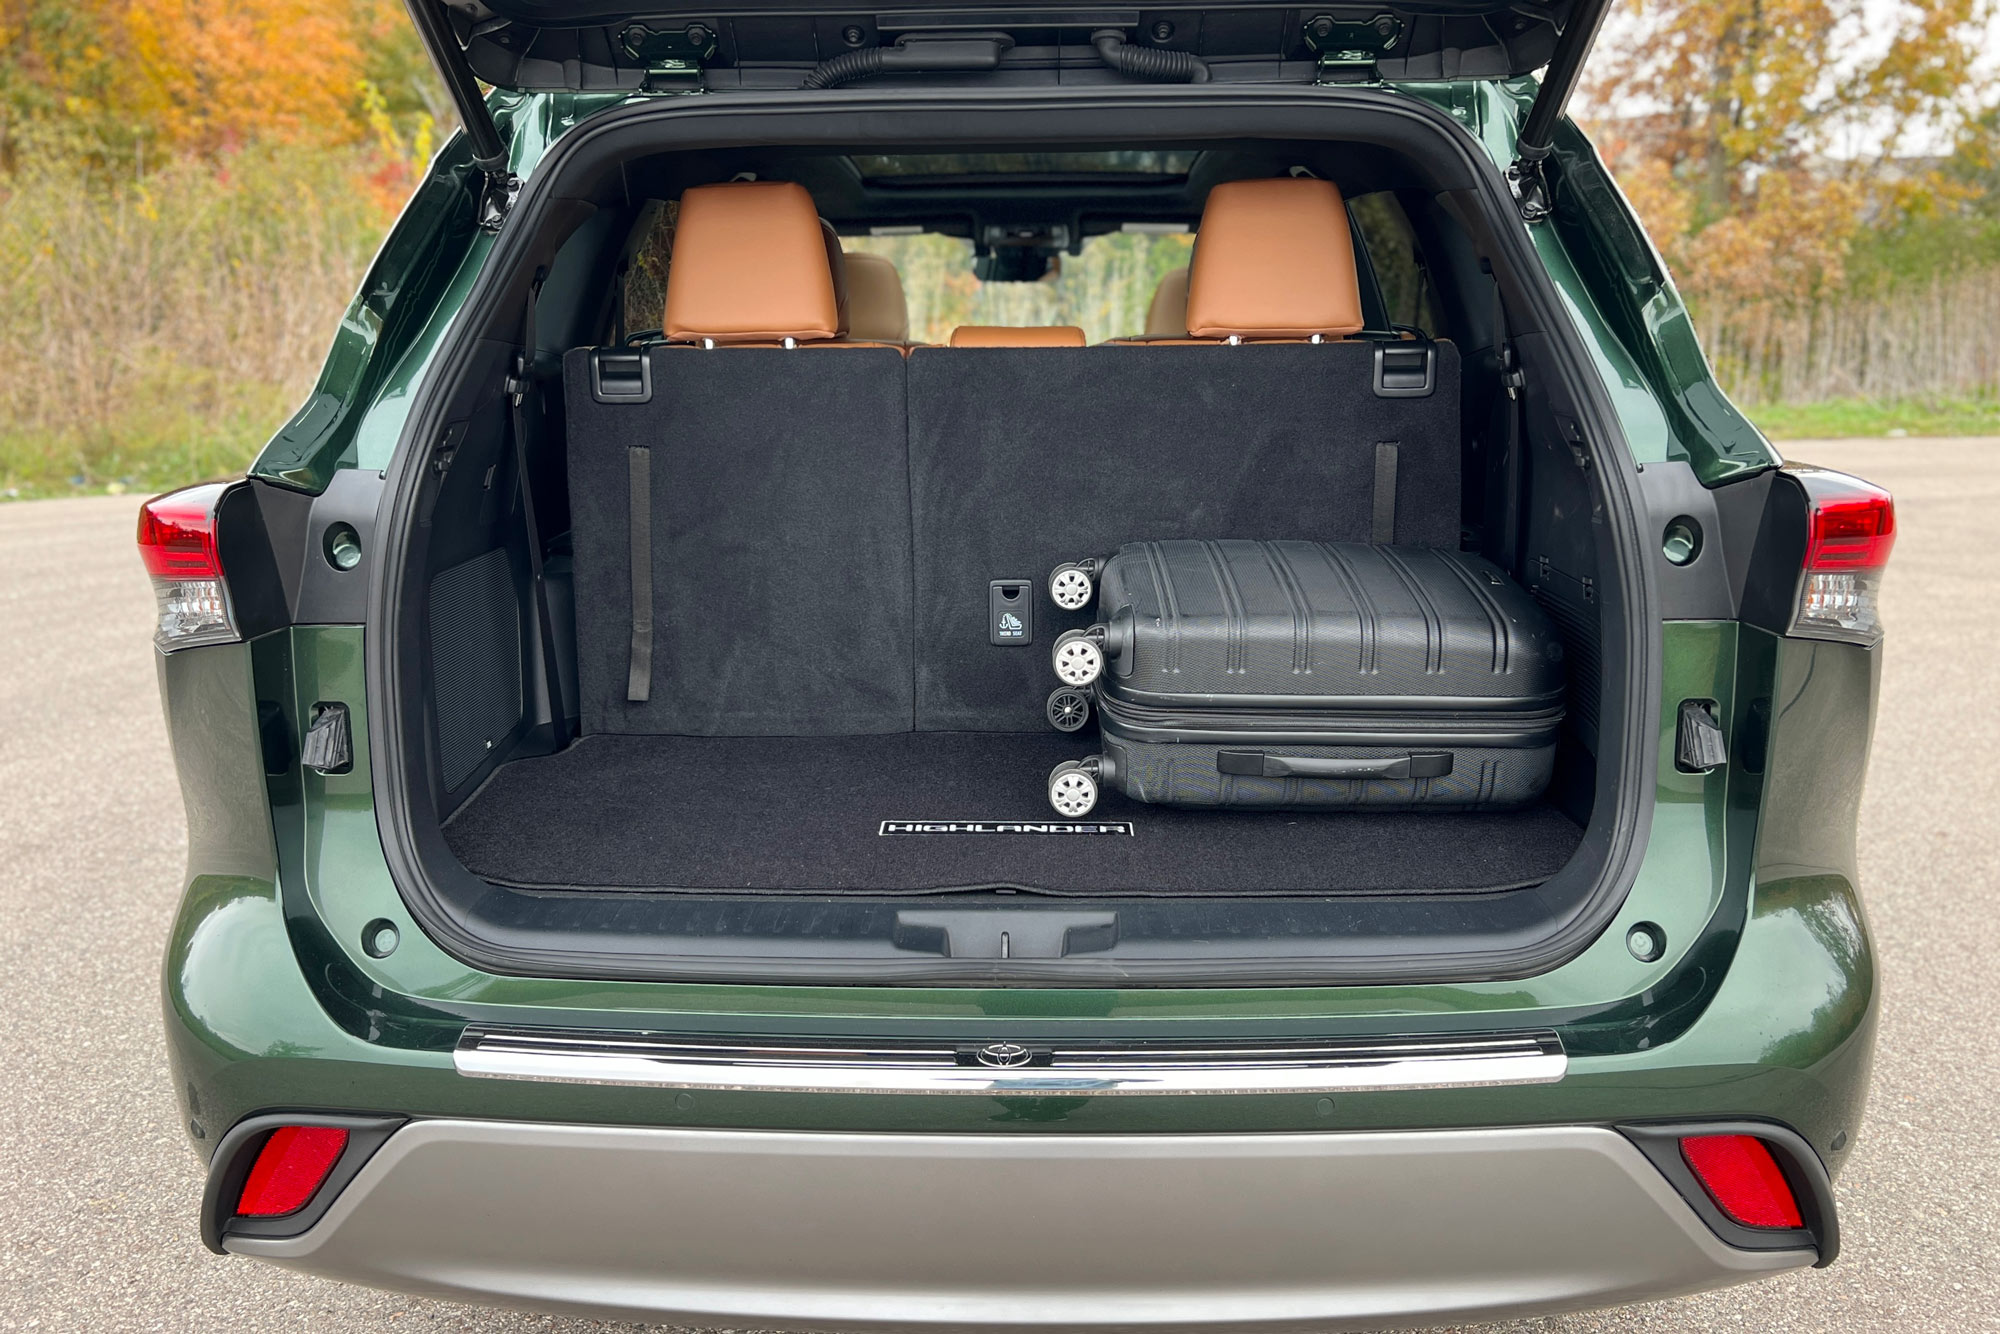 2024 Toyota Highlander cargo area with third row up and luggage stored.